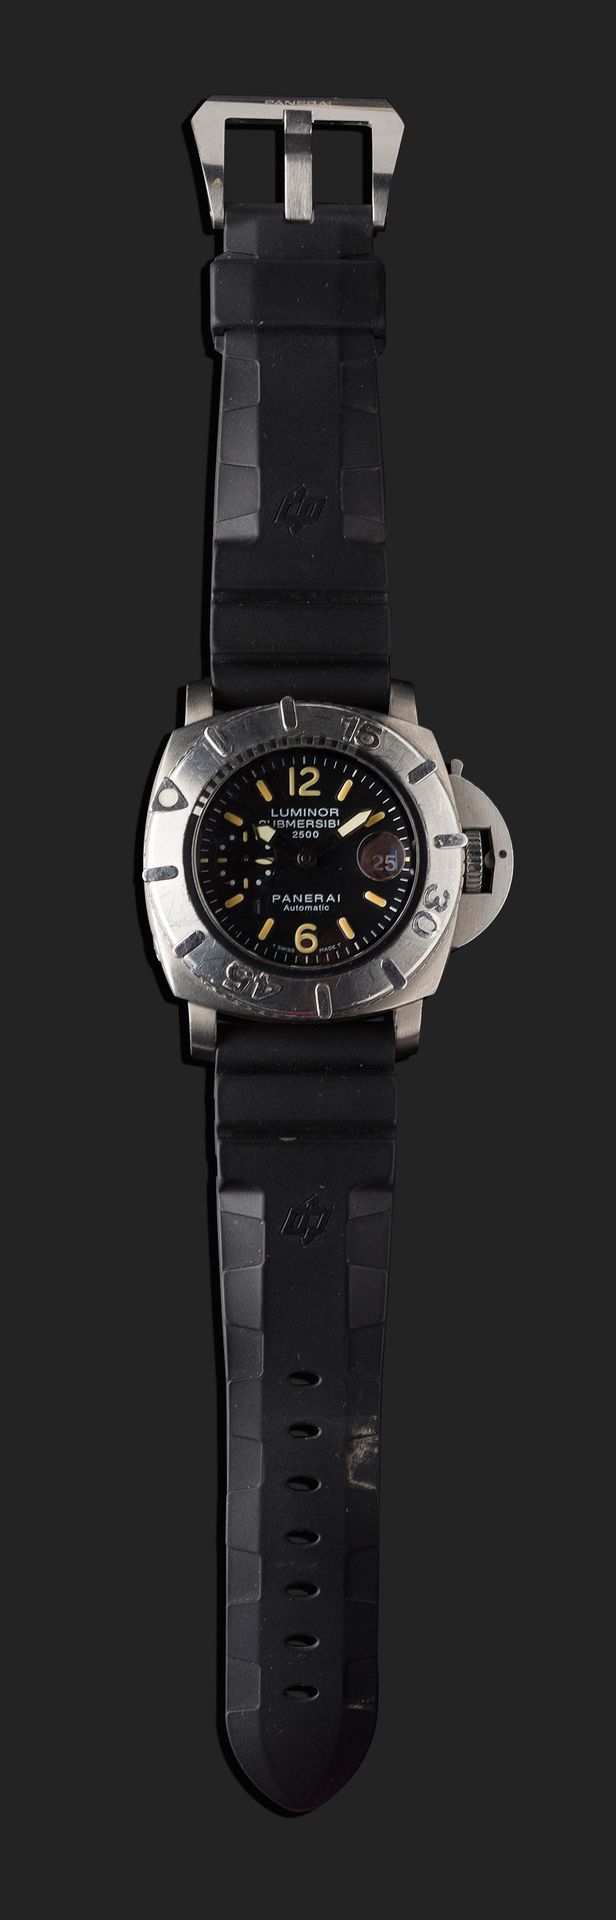 Null PANERAI
Luminor Submersible 2500
BB 2234911, number 349/1000.
Large stainle&hellip;